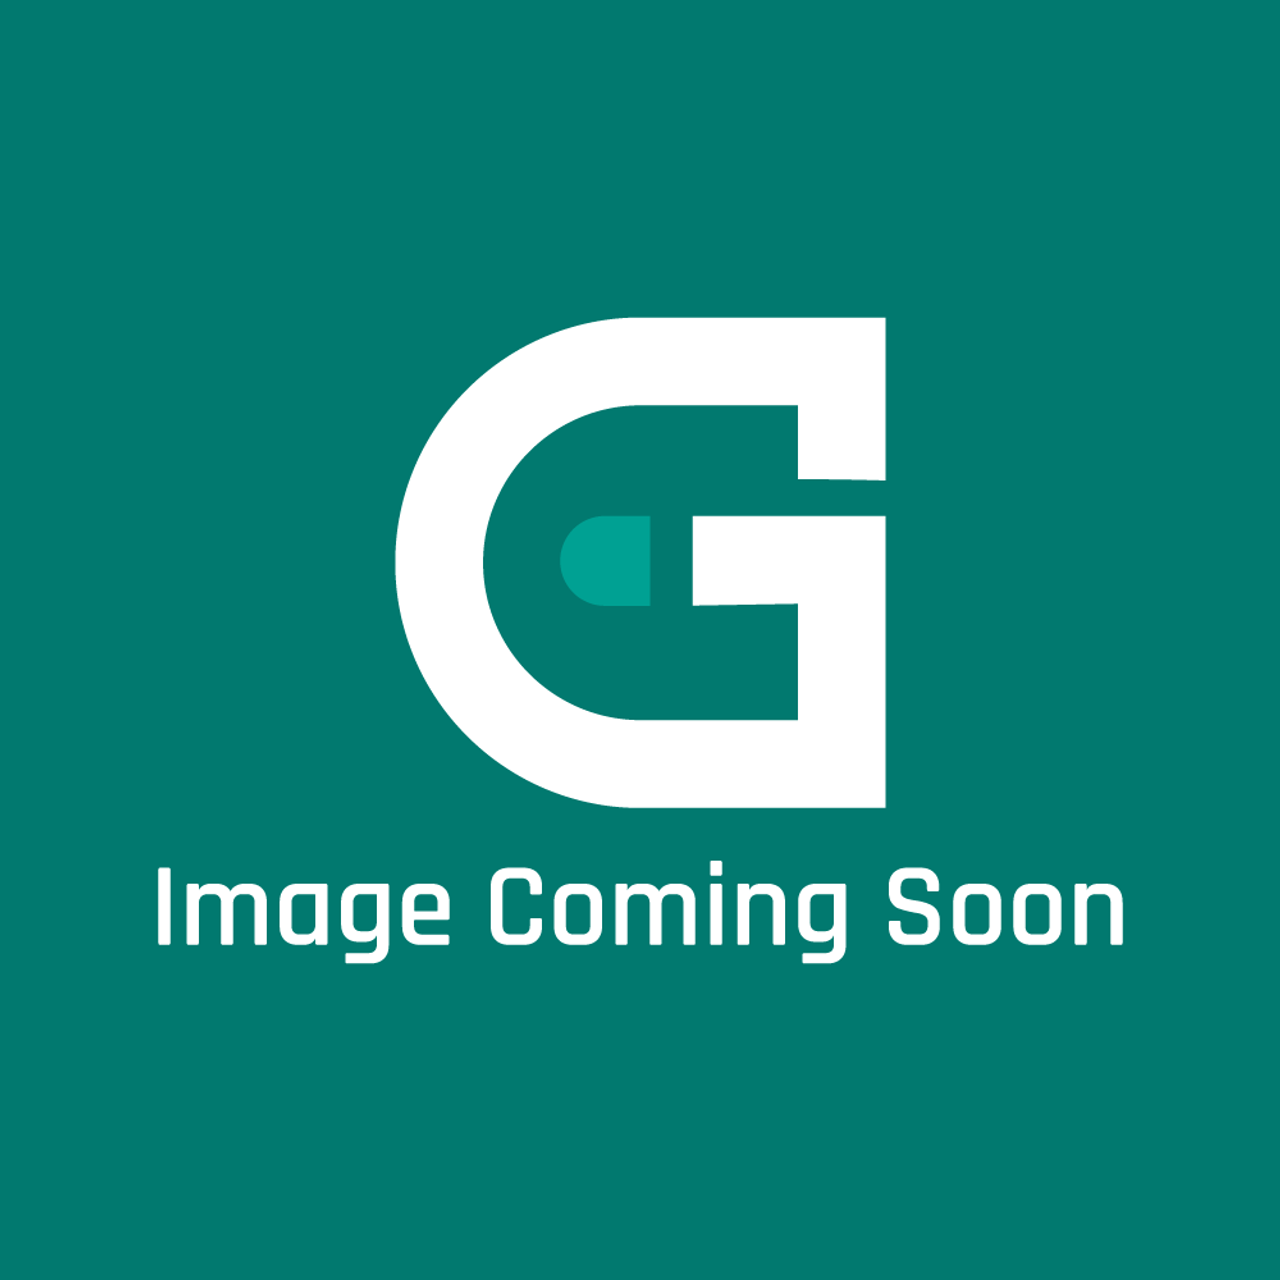 Garland 4525050 - Reg 1 Iso Pro Gas Ce - Image Coming Soon!